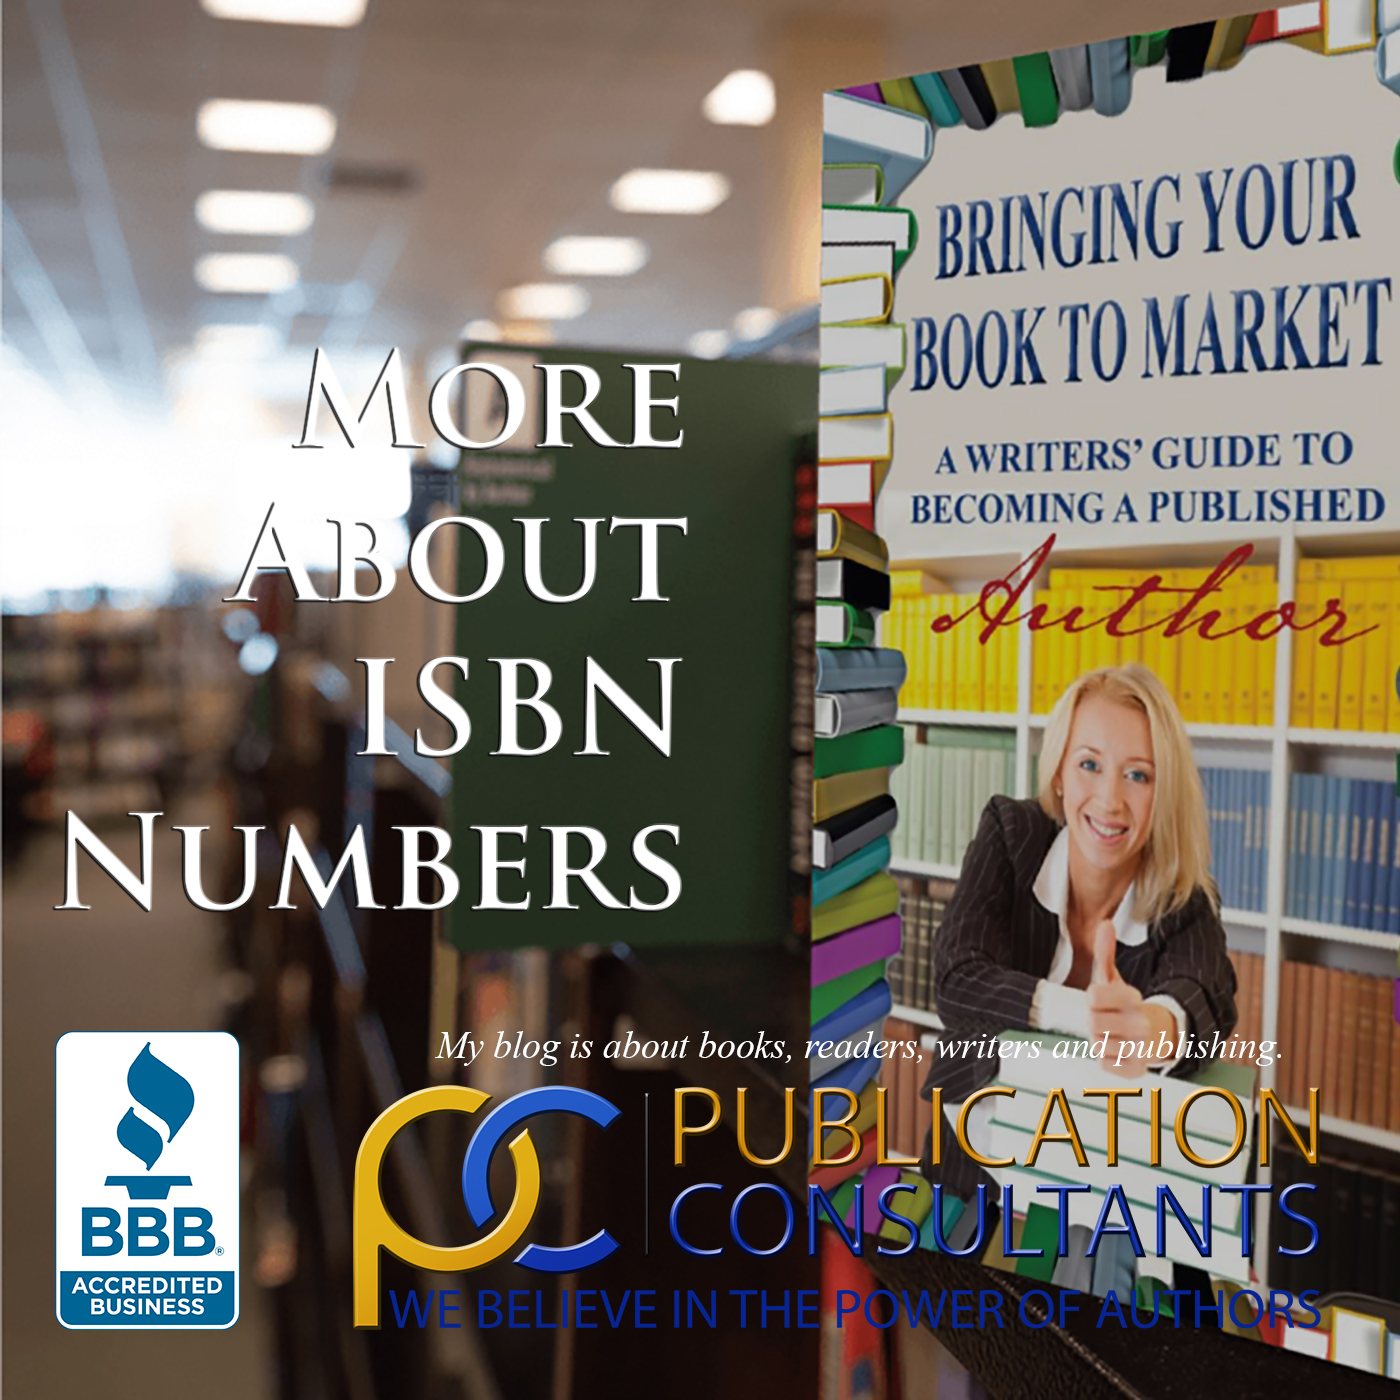 More About ISBN Numbers